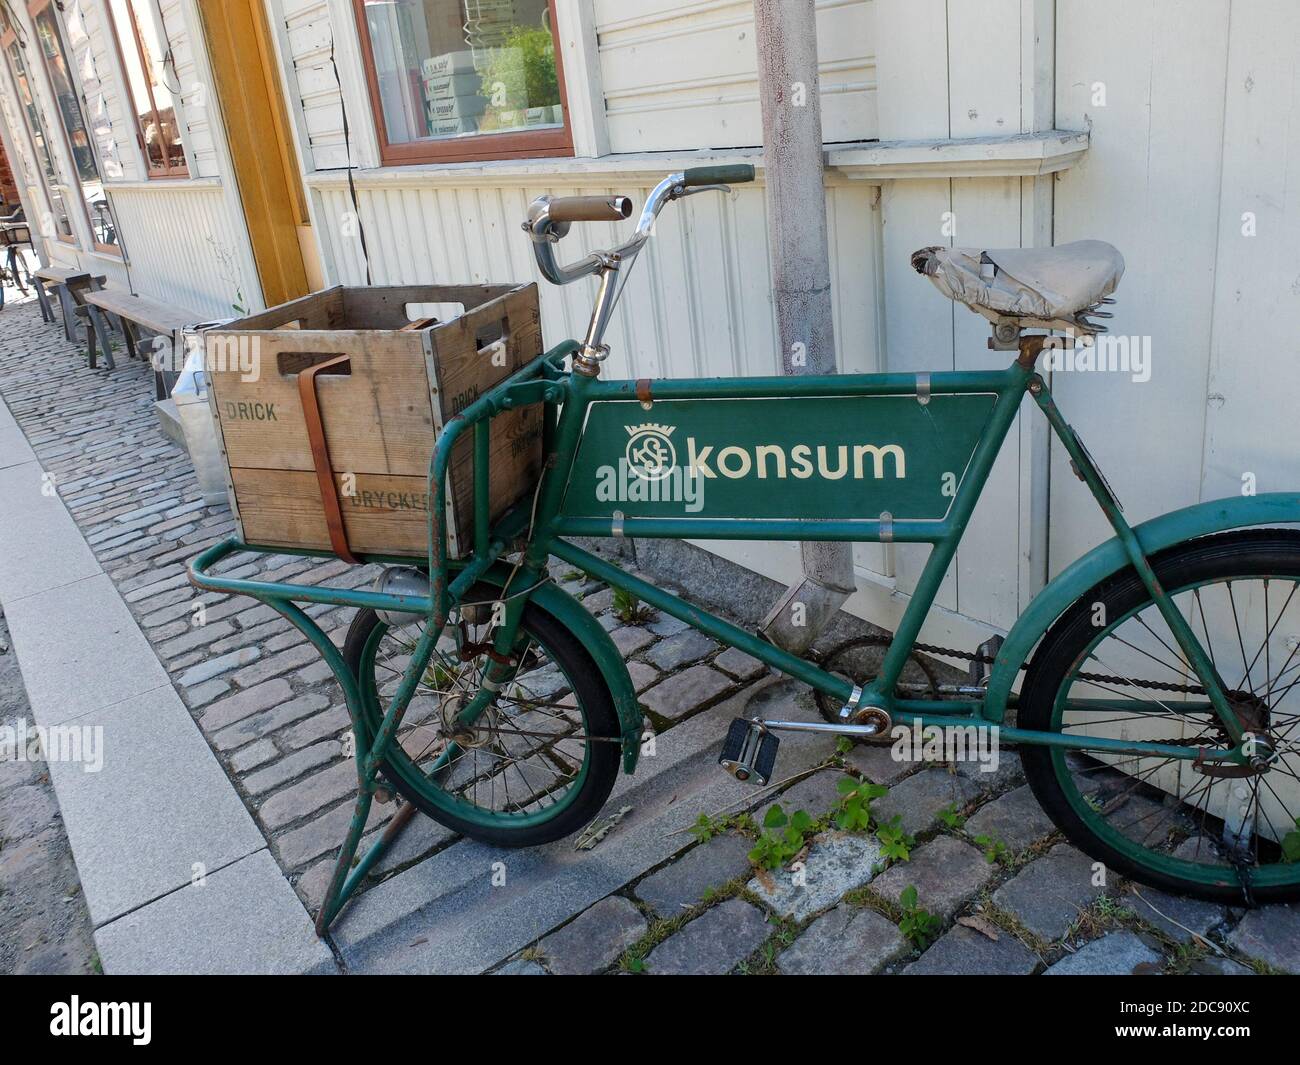 Konsum bicycle in the streets of Skansen. Konsum is a name used for grocery stores within the Cooperative Association in the 20th century Stock Photo